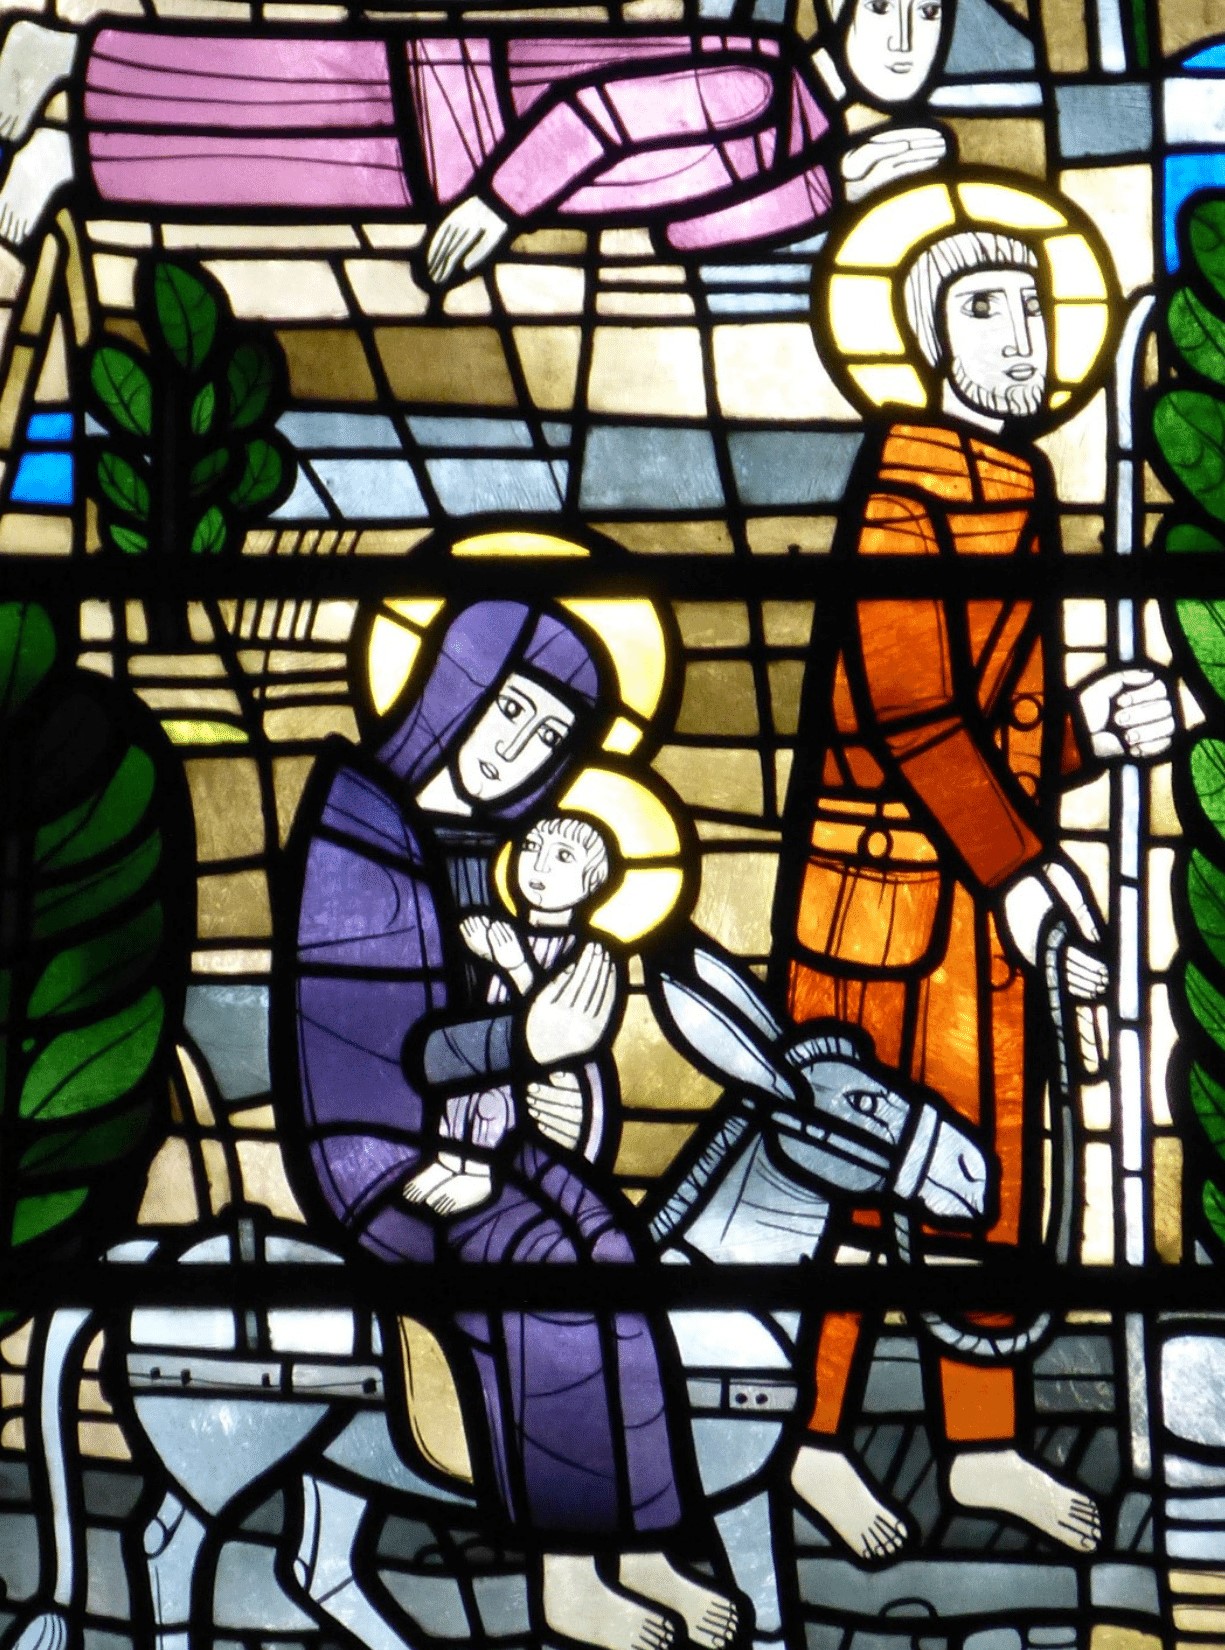 The Holy Family with an angel overhead depicted in stained glass